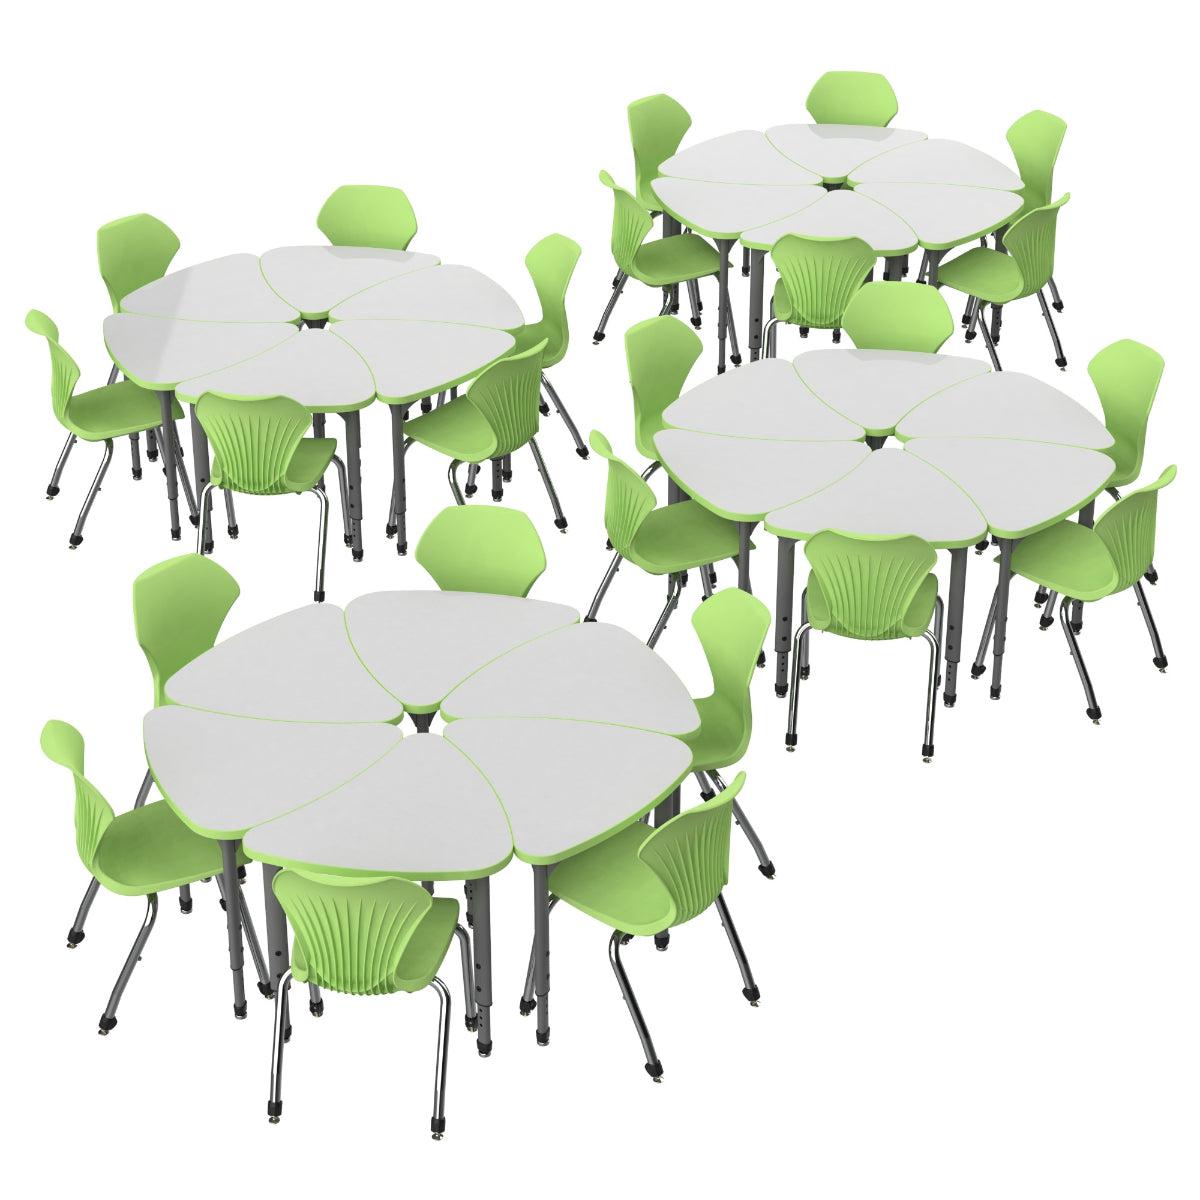 Apex Dry Erase Classroom Desk and Chair Package, 24 Large Chevron Collaborative Student Desks with 24 Apex Stack Chairs